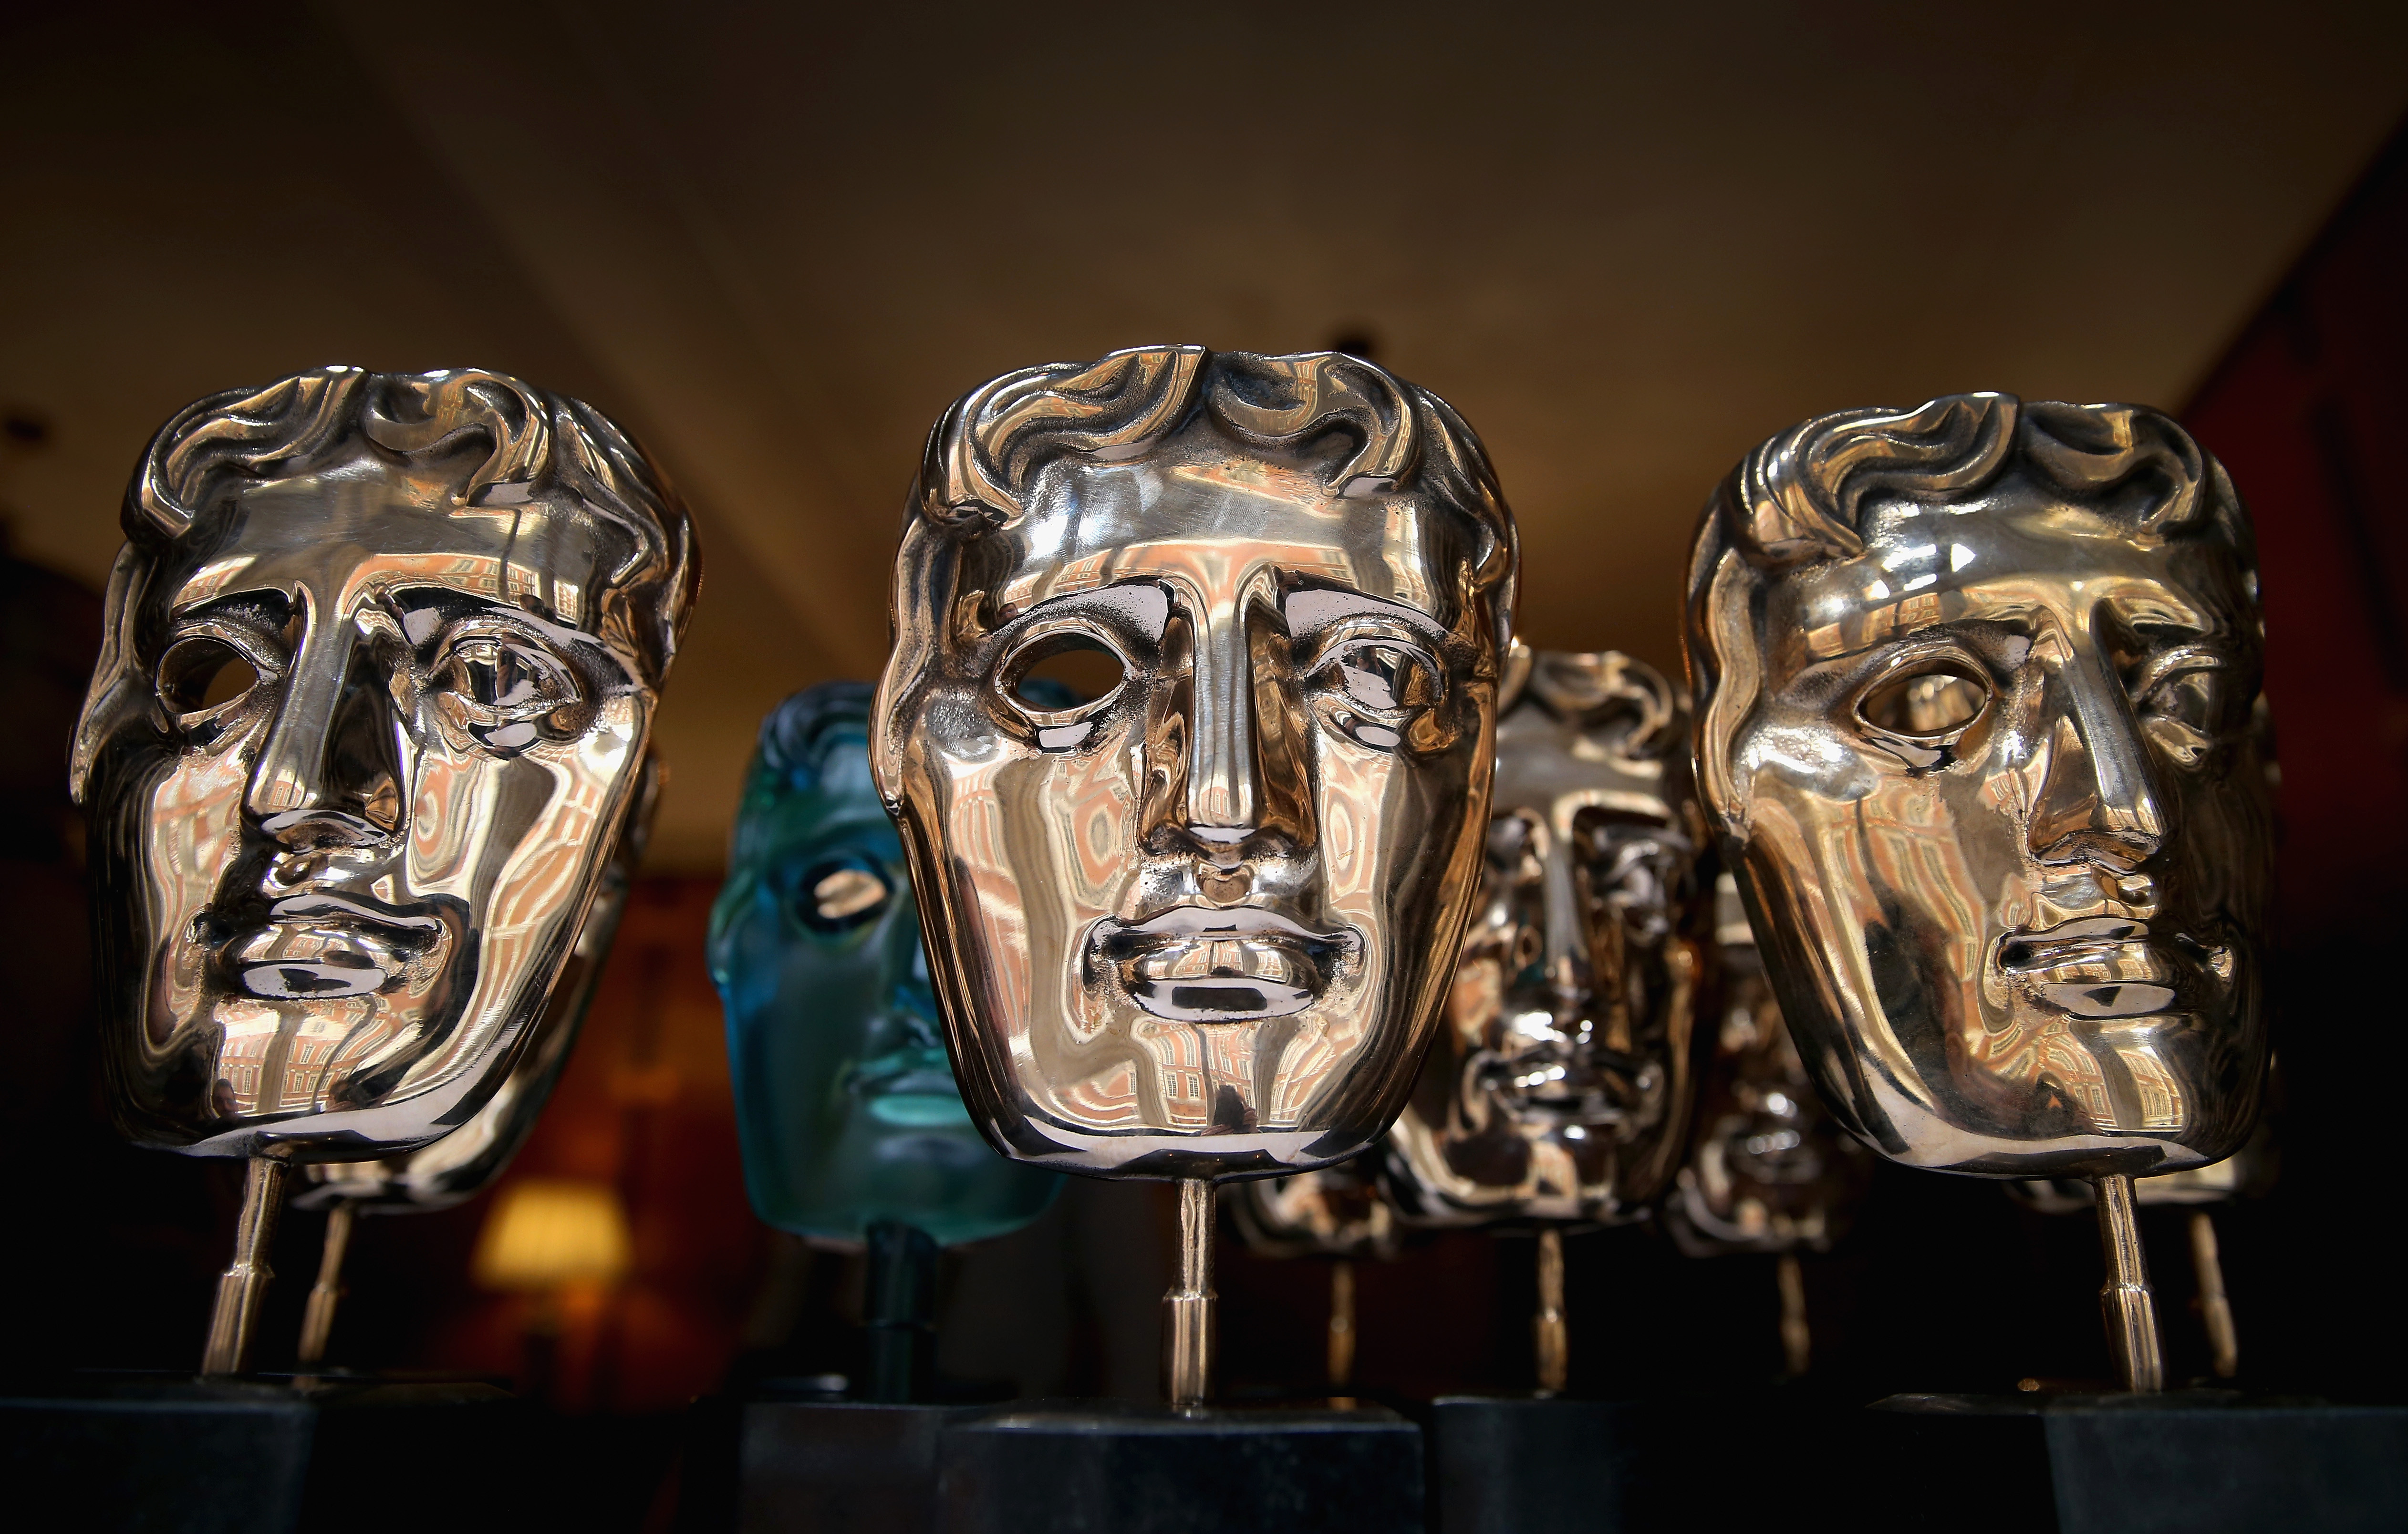 Who is the BAFTA mask modelled on?